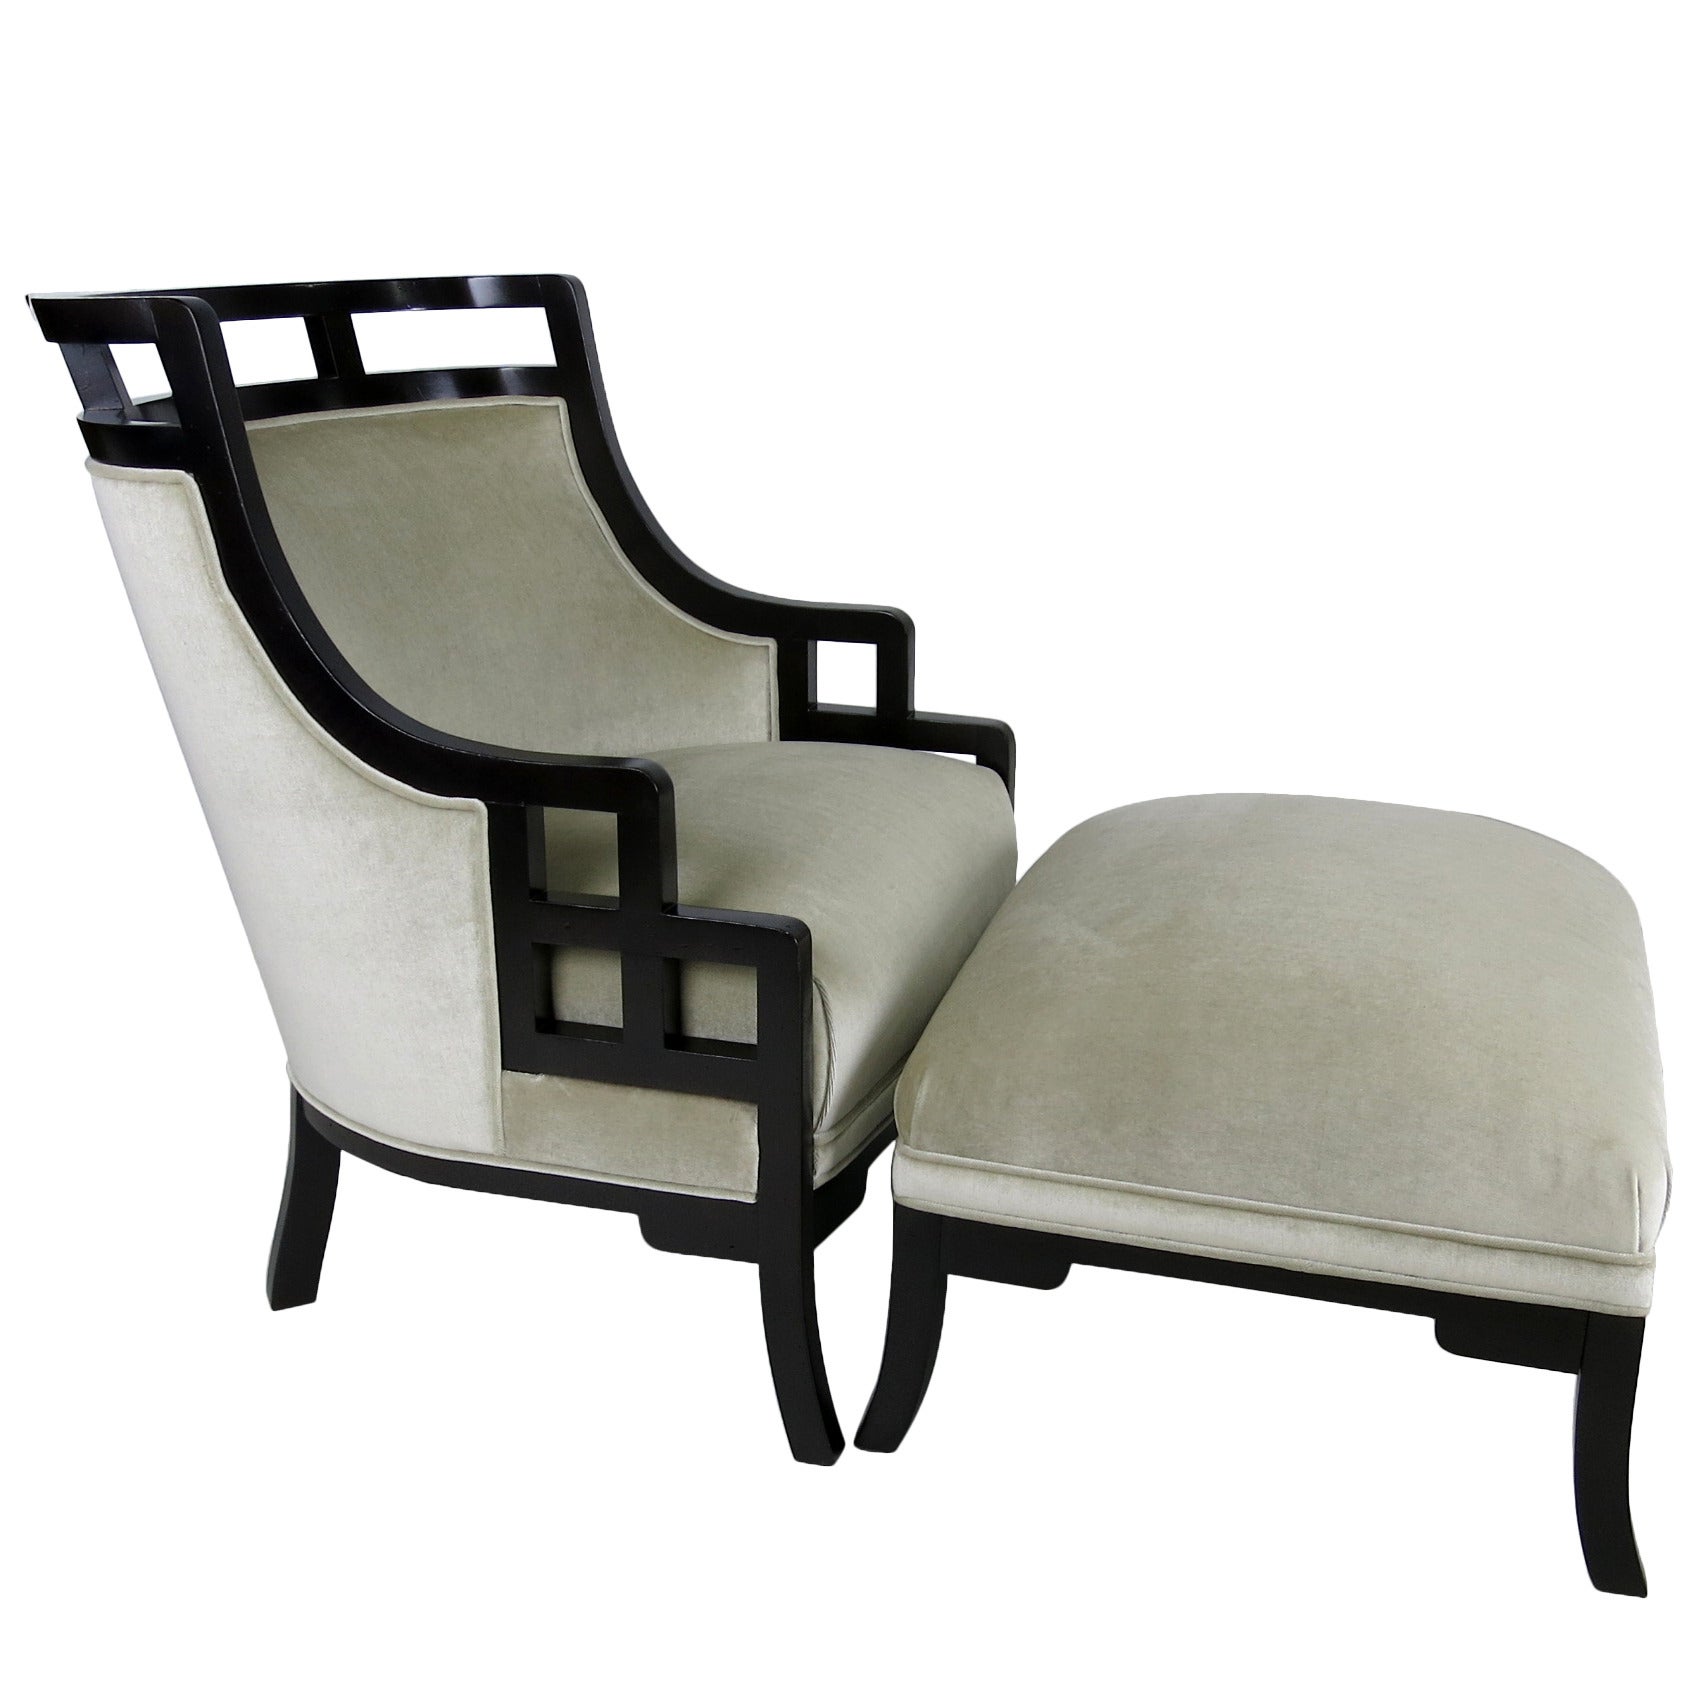 "Wallis Simpson" Lounge Chair and Ottoman by Jay Spectre